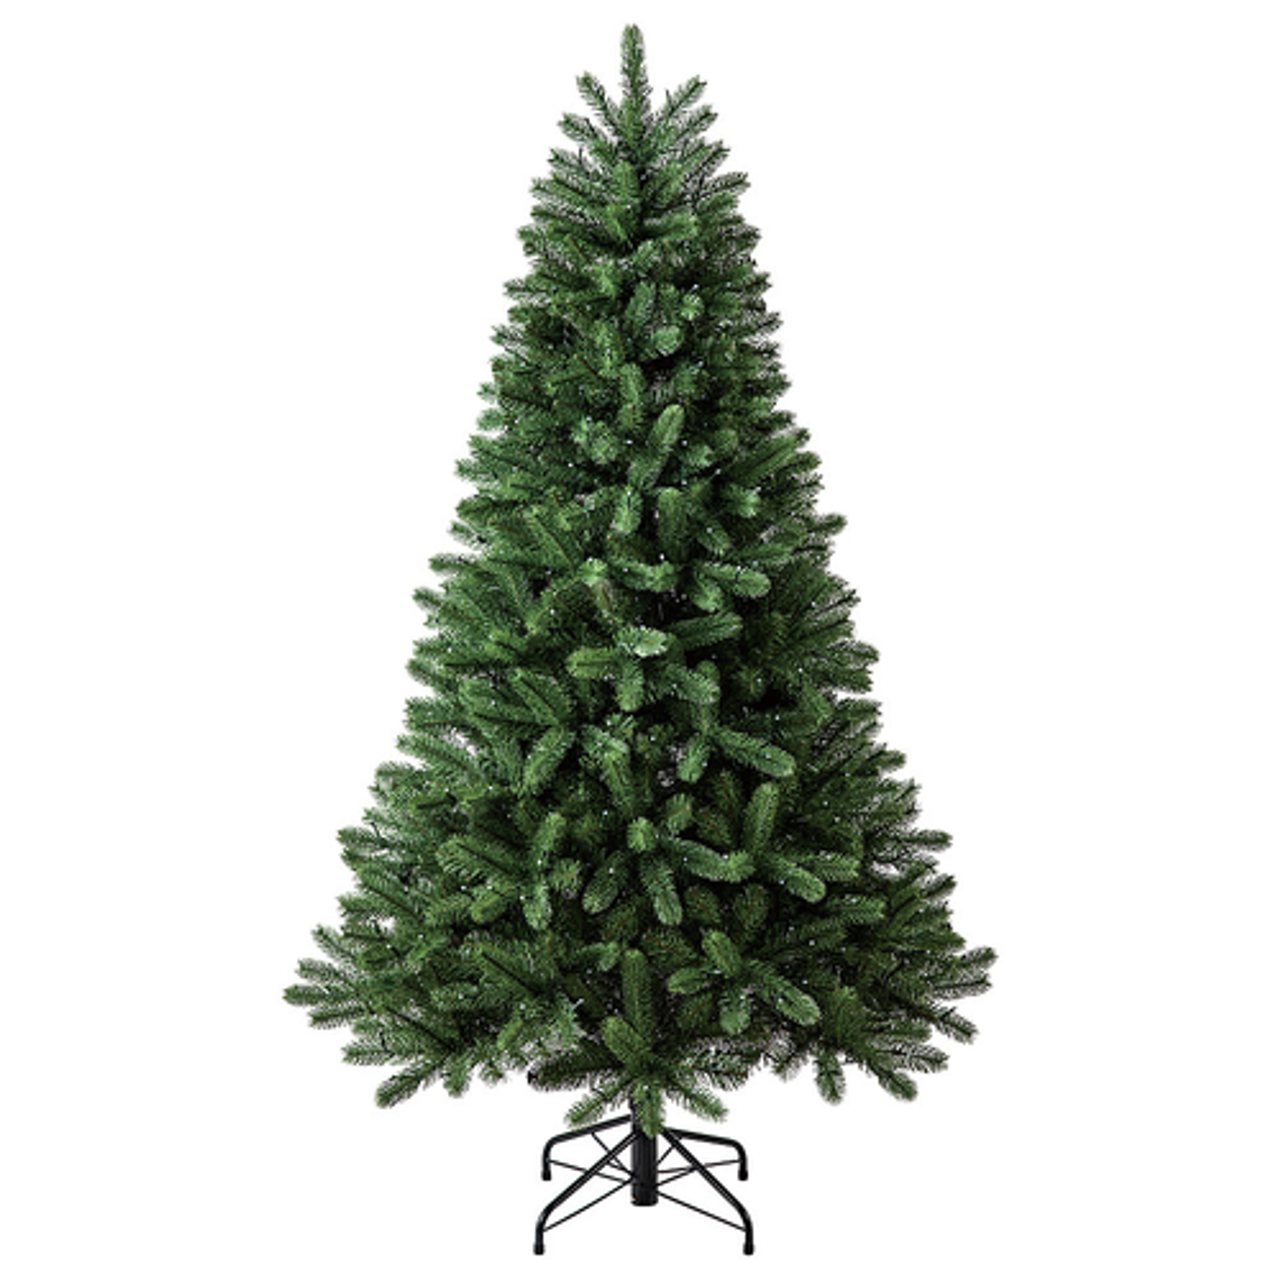 Twinkly - 6ft Pre-Lit Smart Light Regal Tree with 435 RGB LEDs - Multi